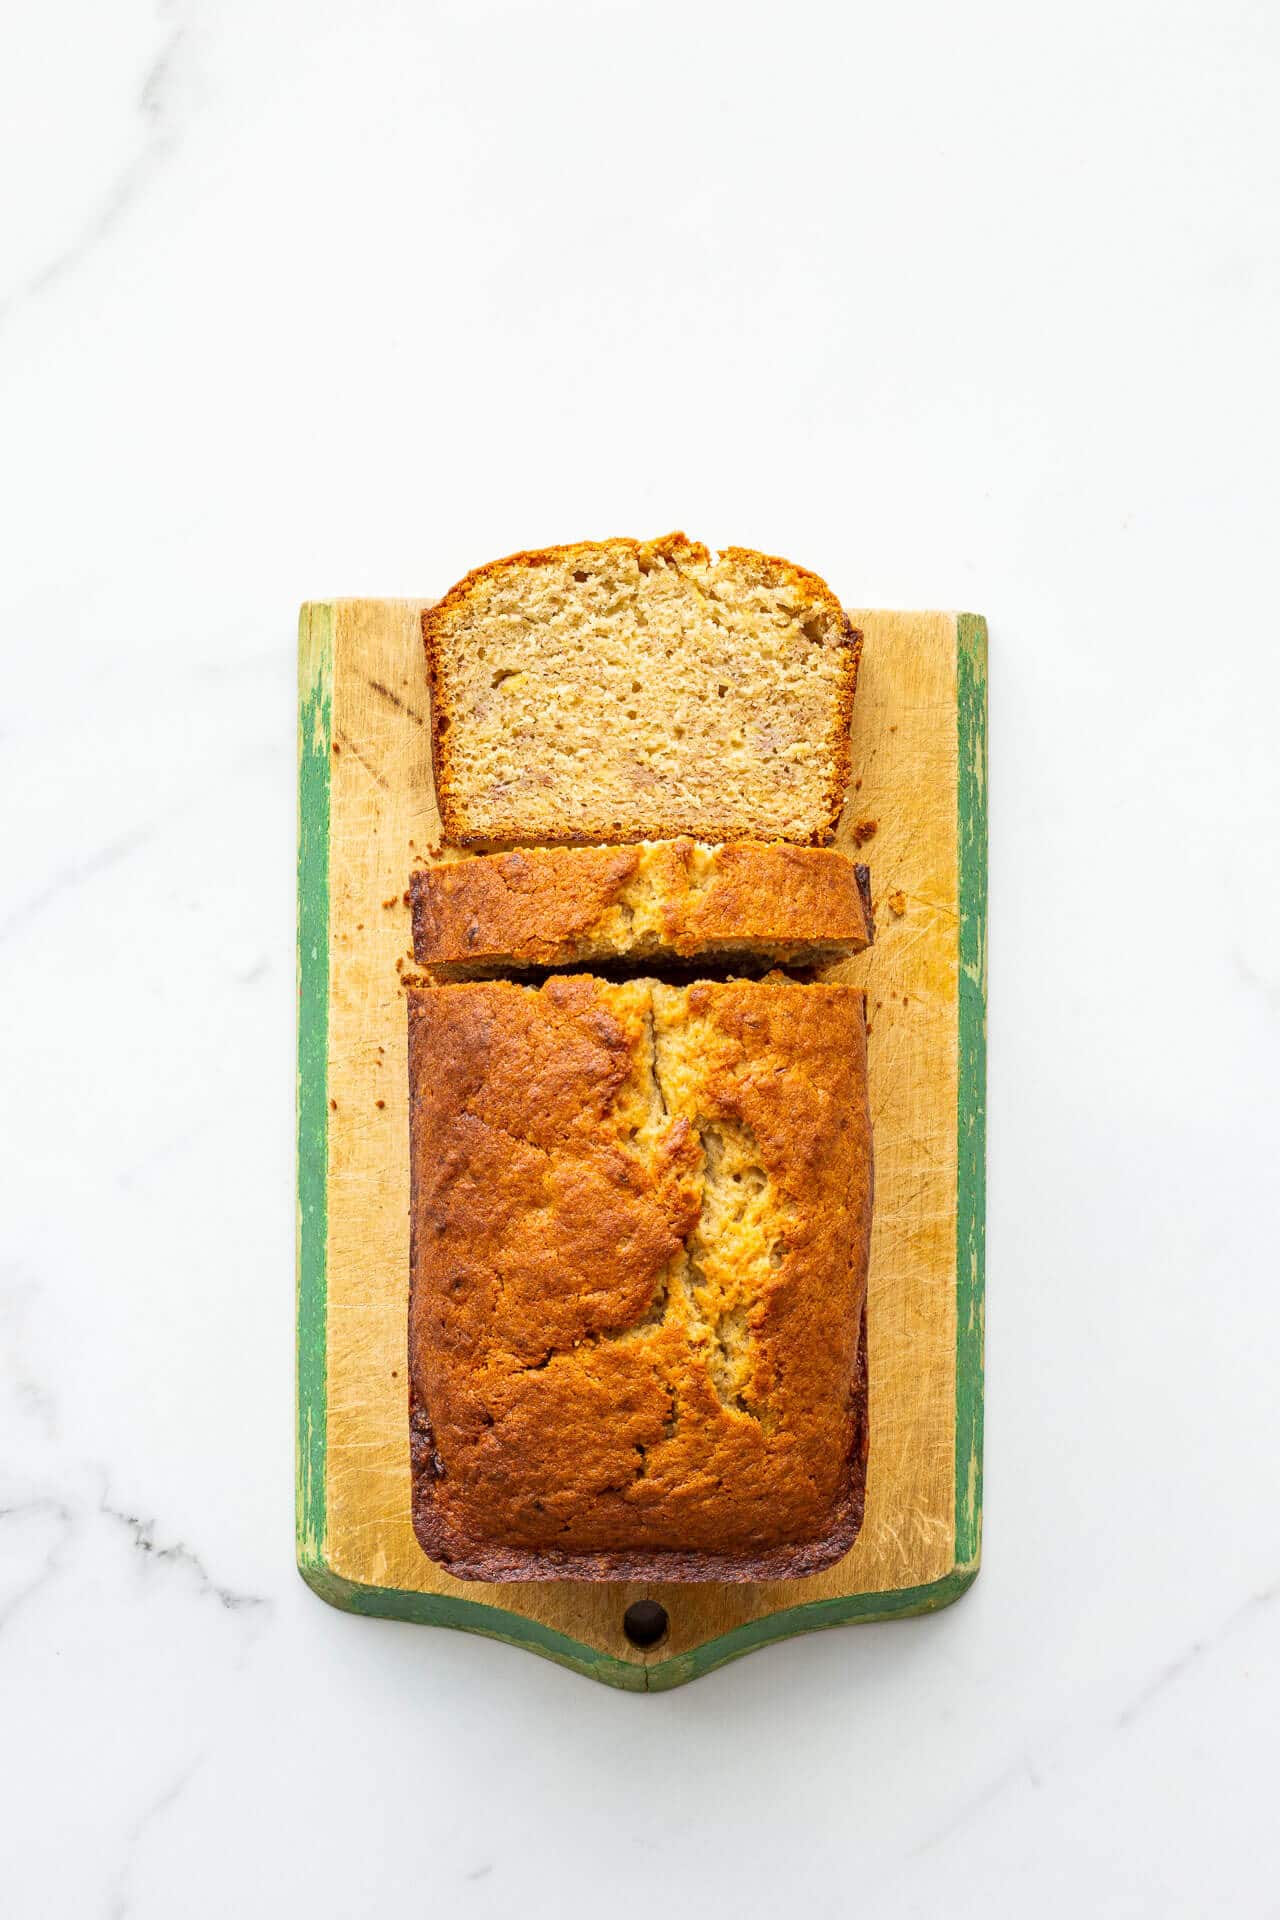 Golden brown banana bread on a vintage wood cutting board with painted green trim.